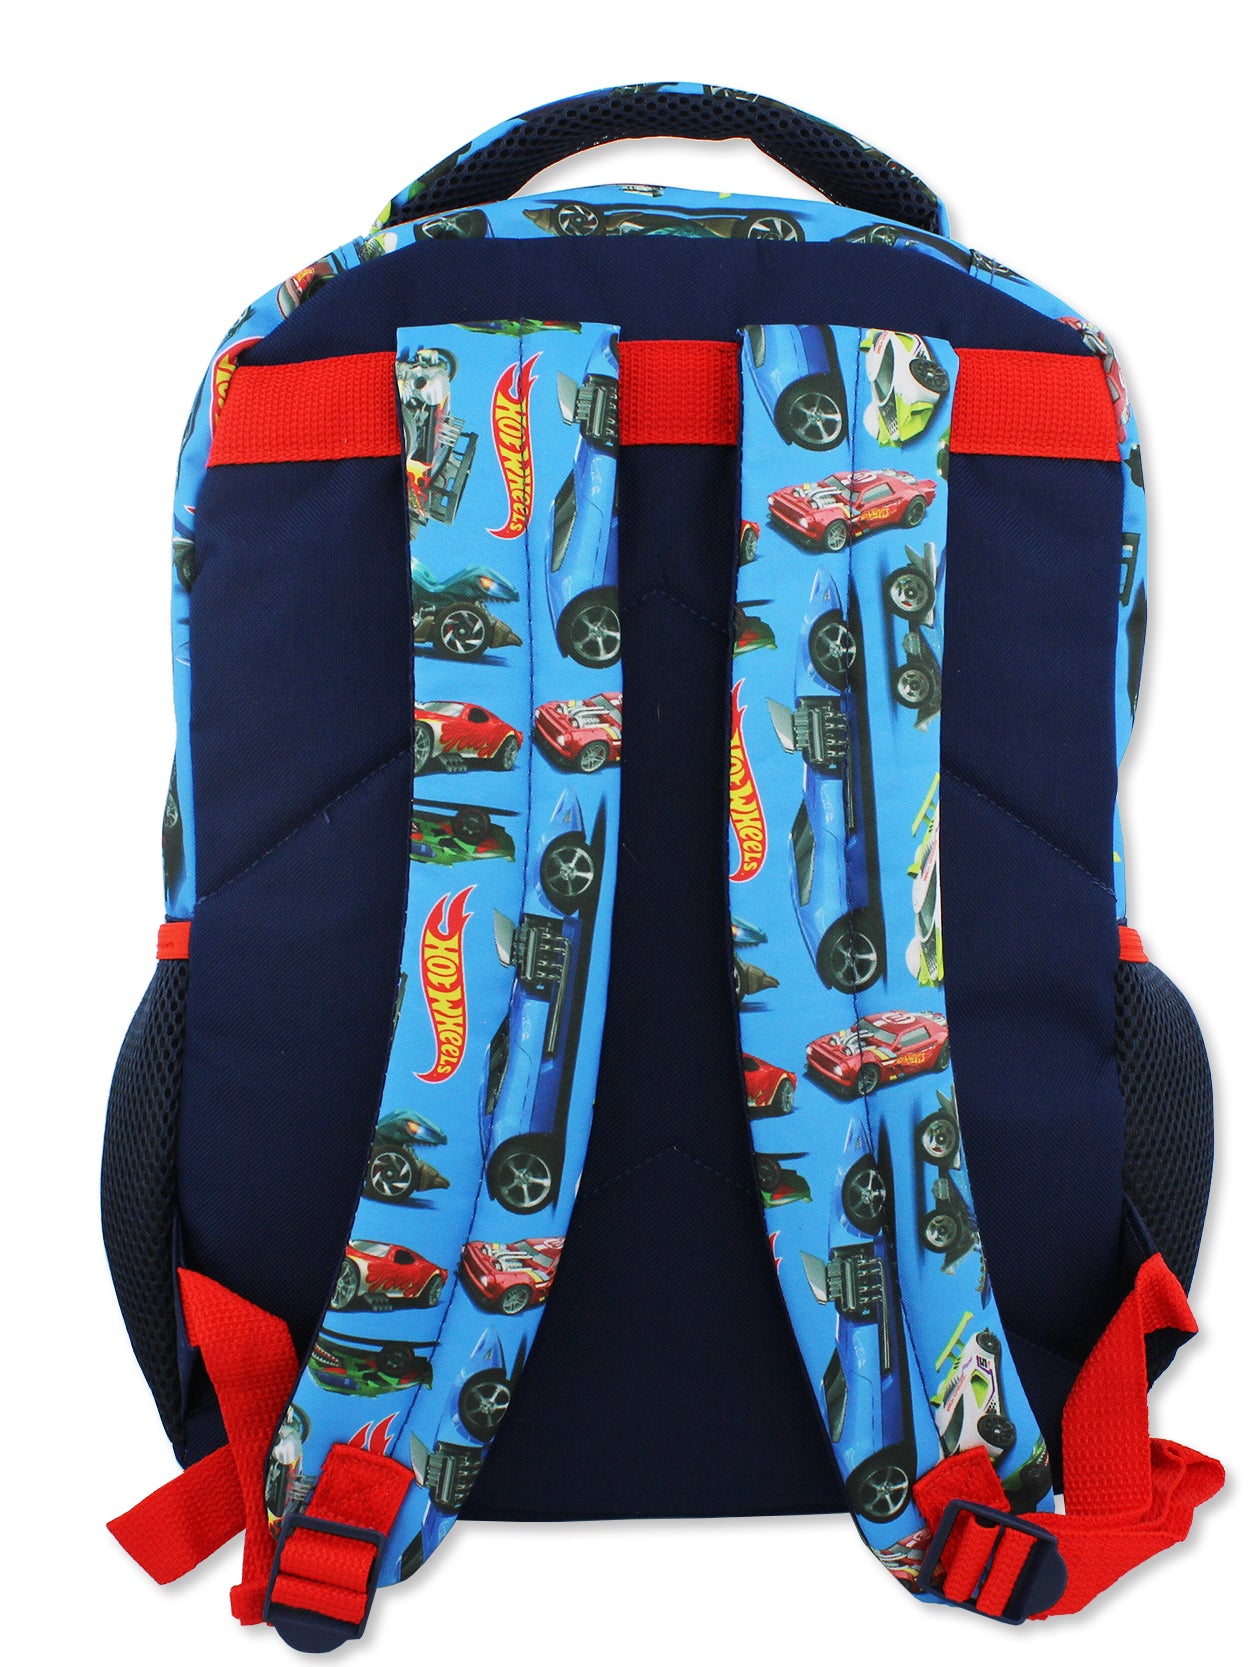  Disney Pixar Cars Backpack Set for Kids, 16 inch with Lunch  Bag and Water Bottle